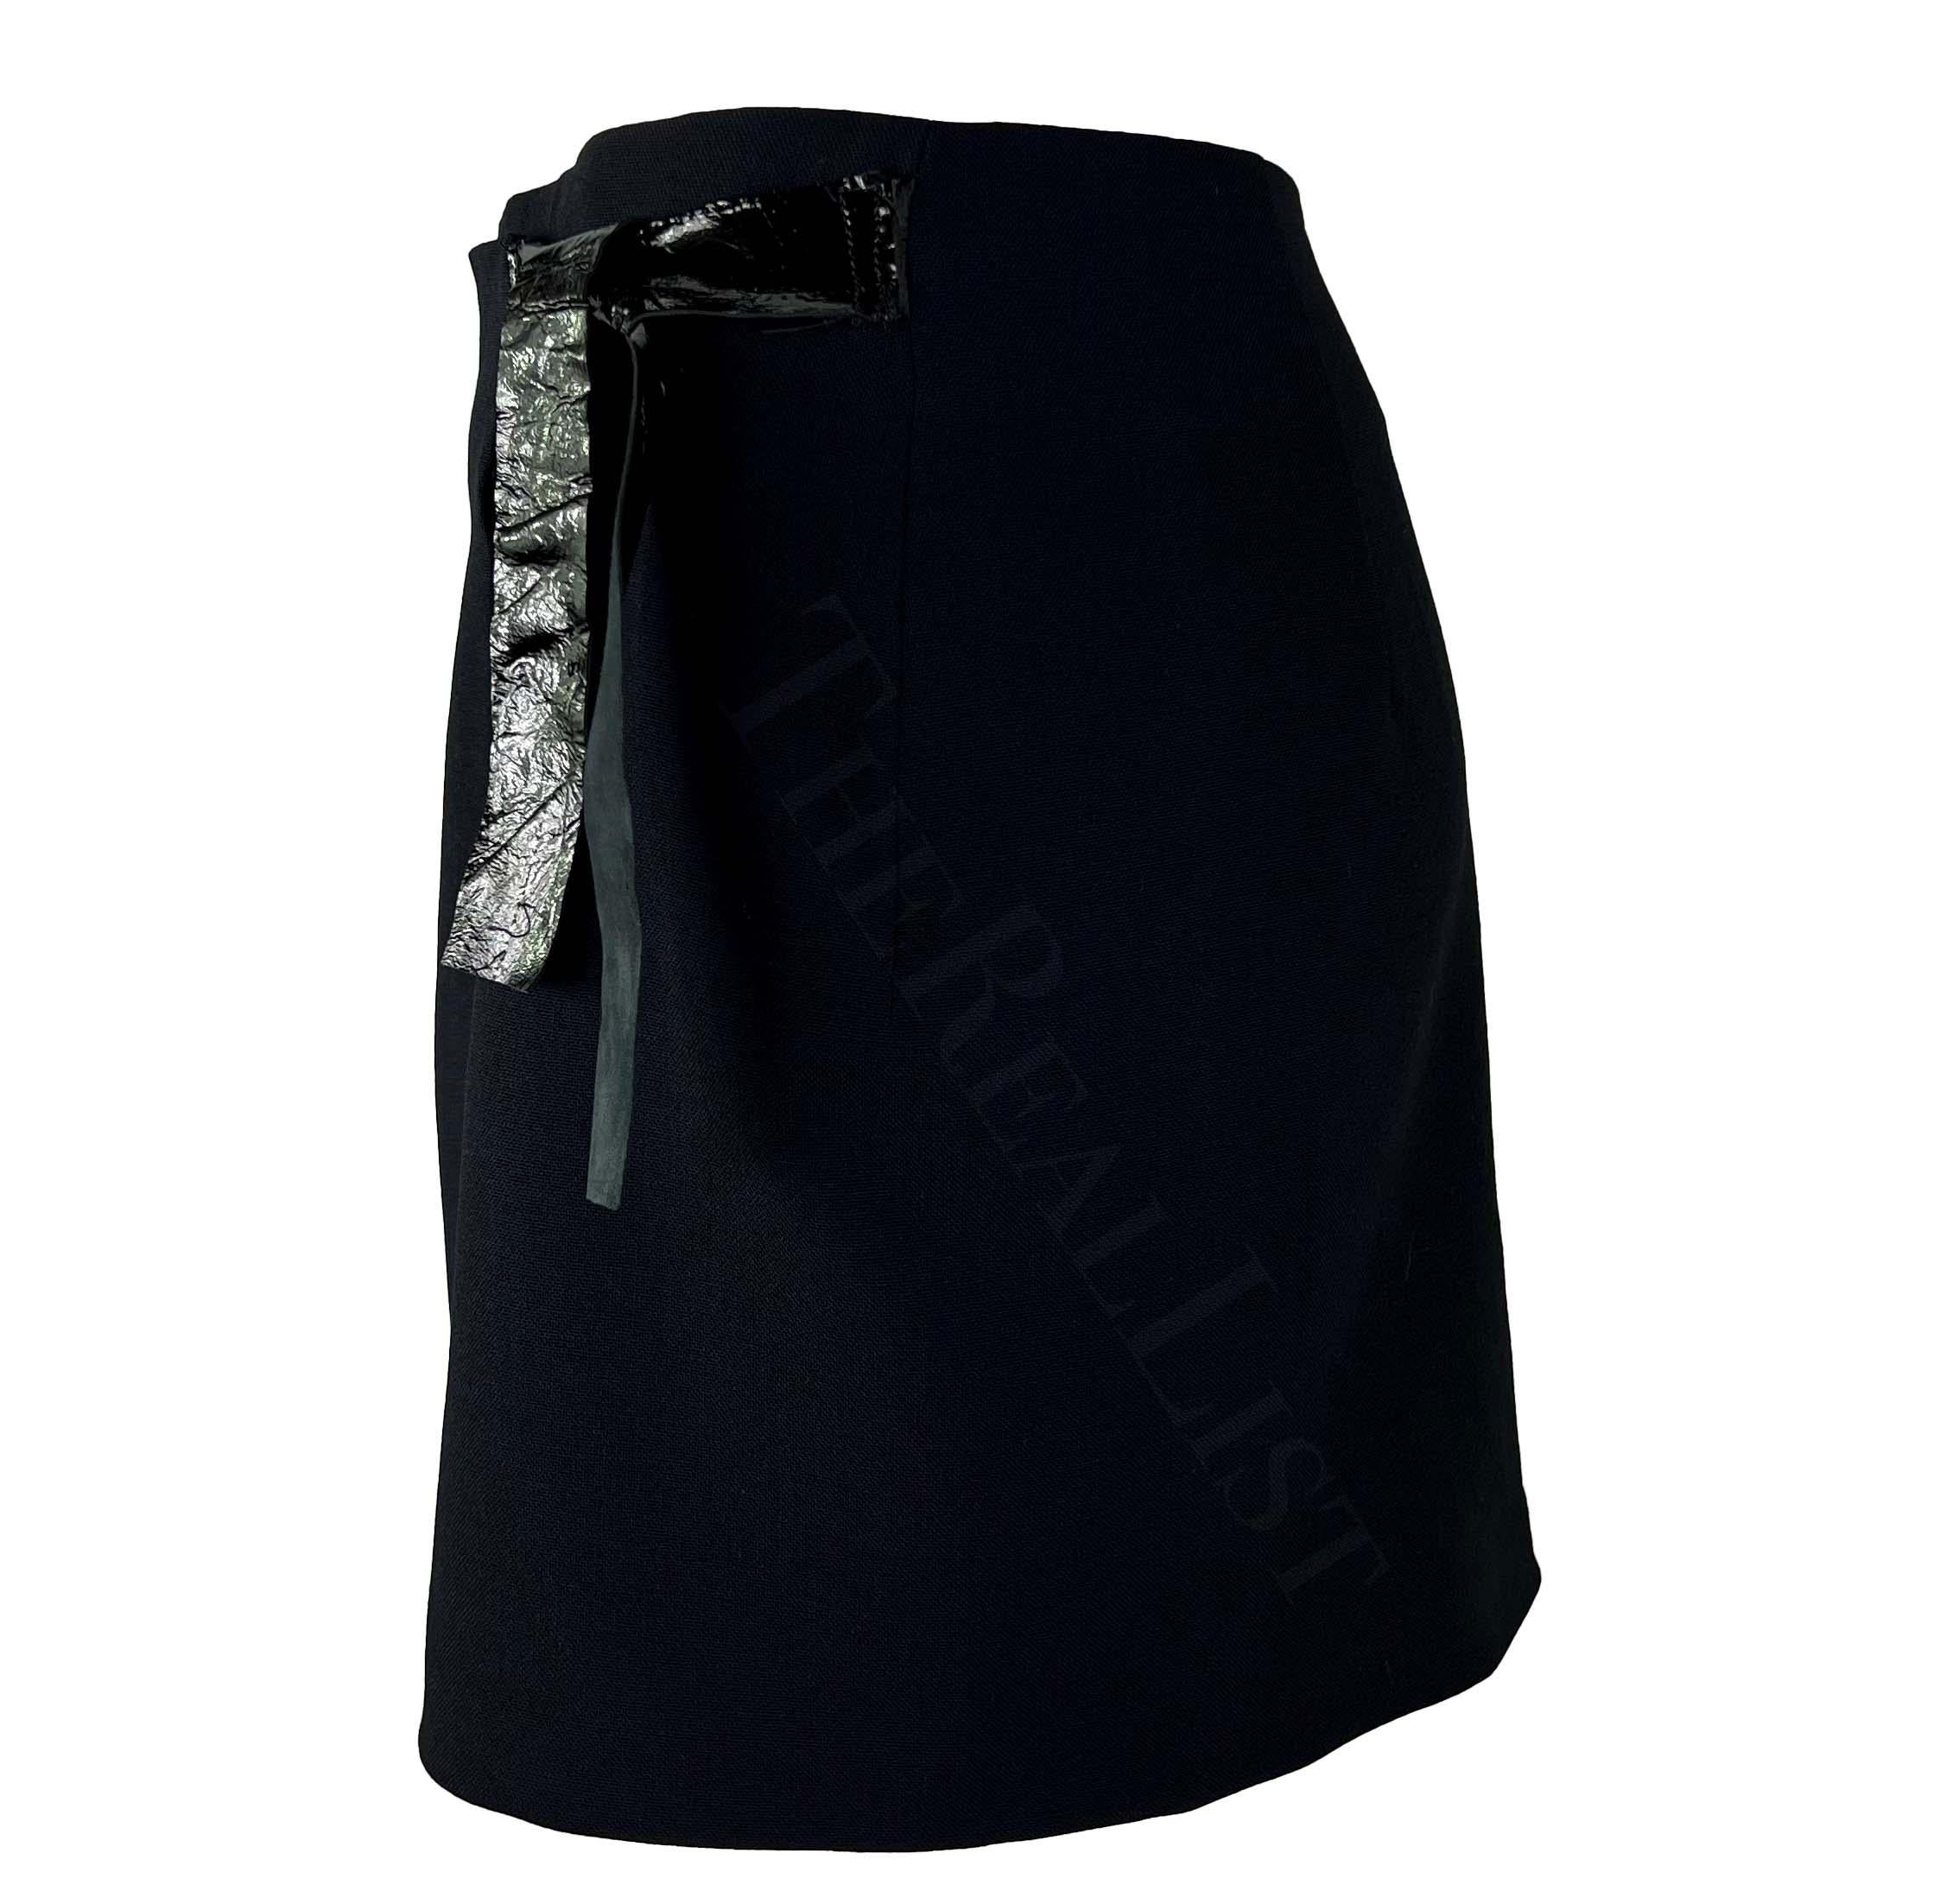 Women's S/S 1998 Gucci by Tom Ford Prototype Sample Patent Leather Wrap Mini Skirt For Sale